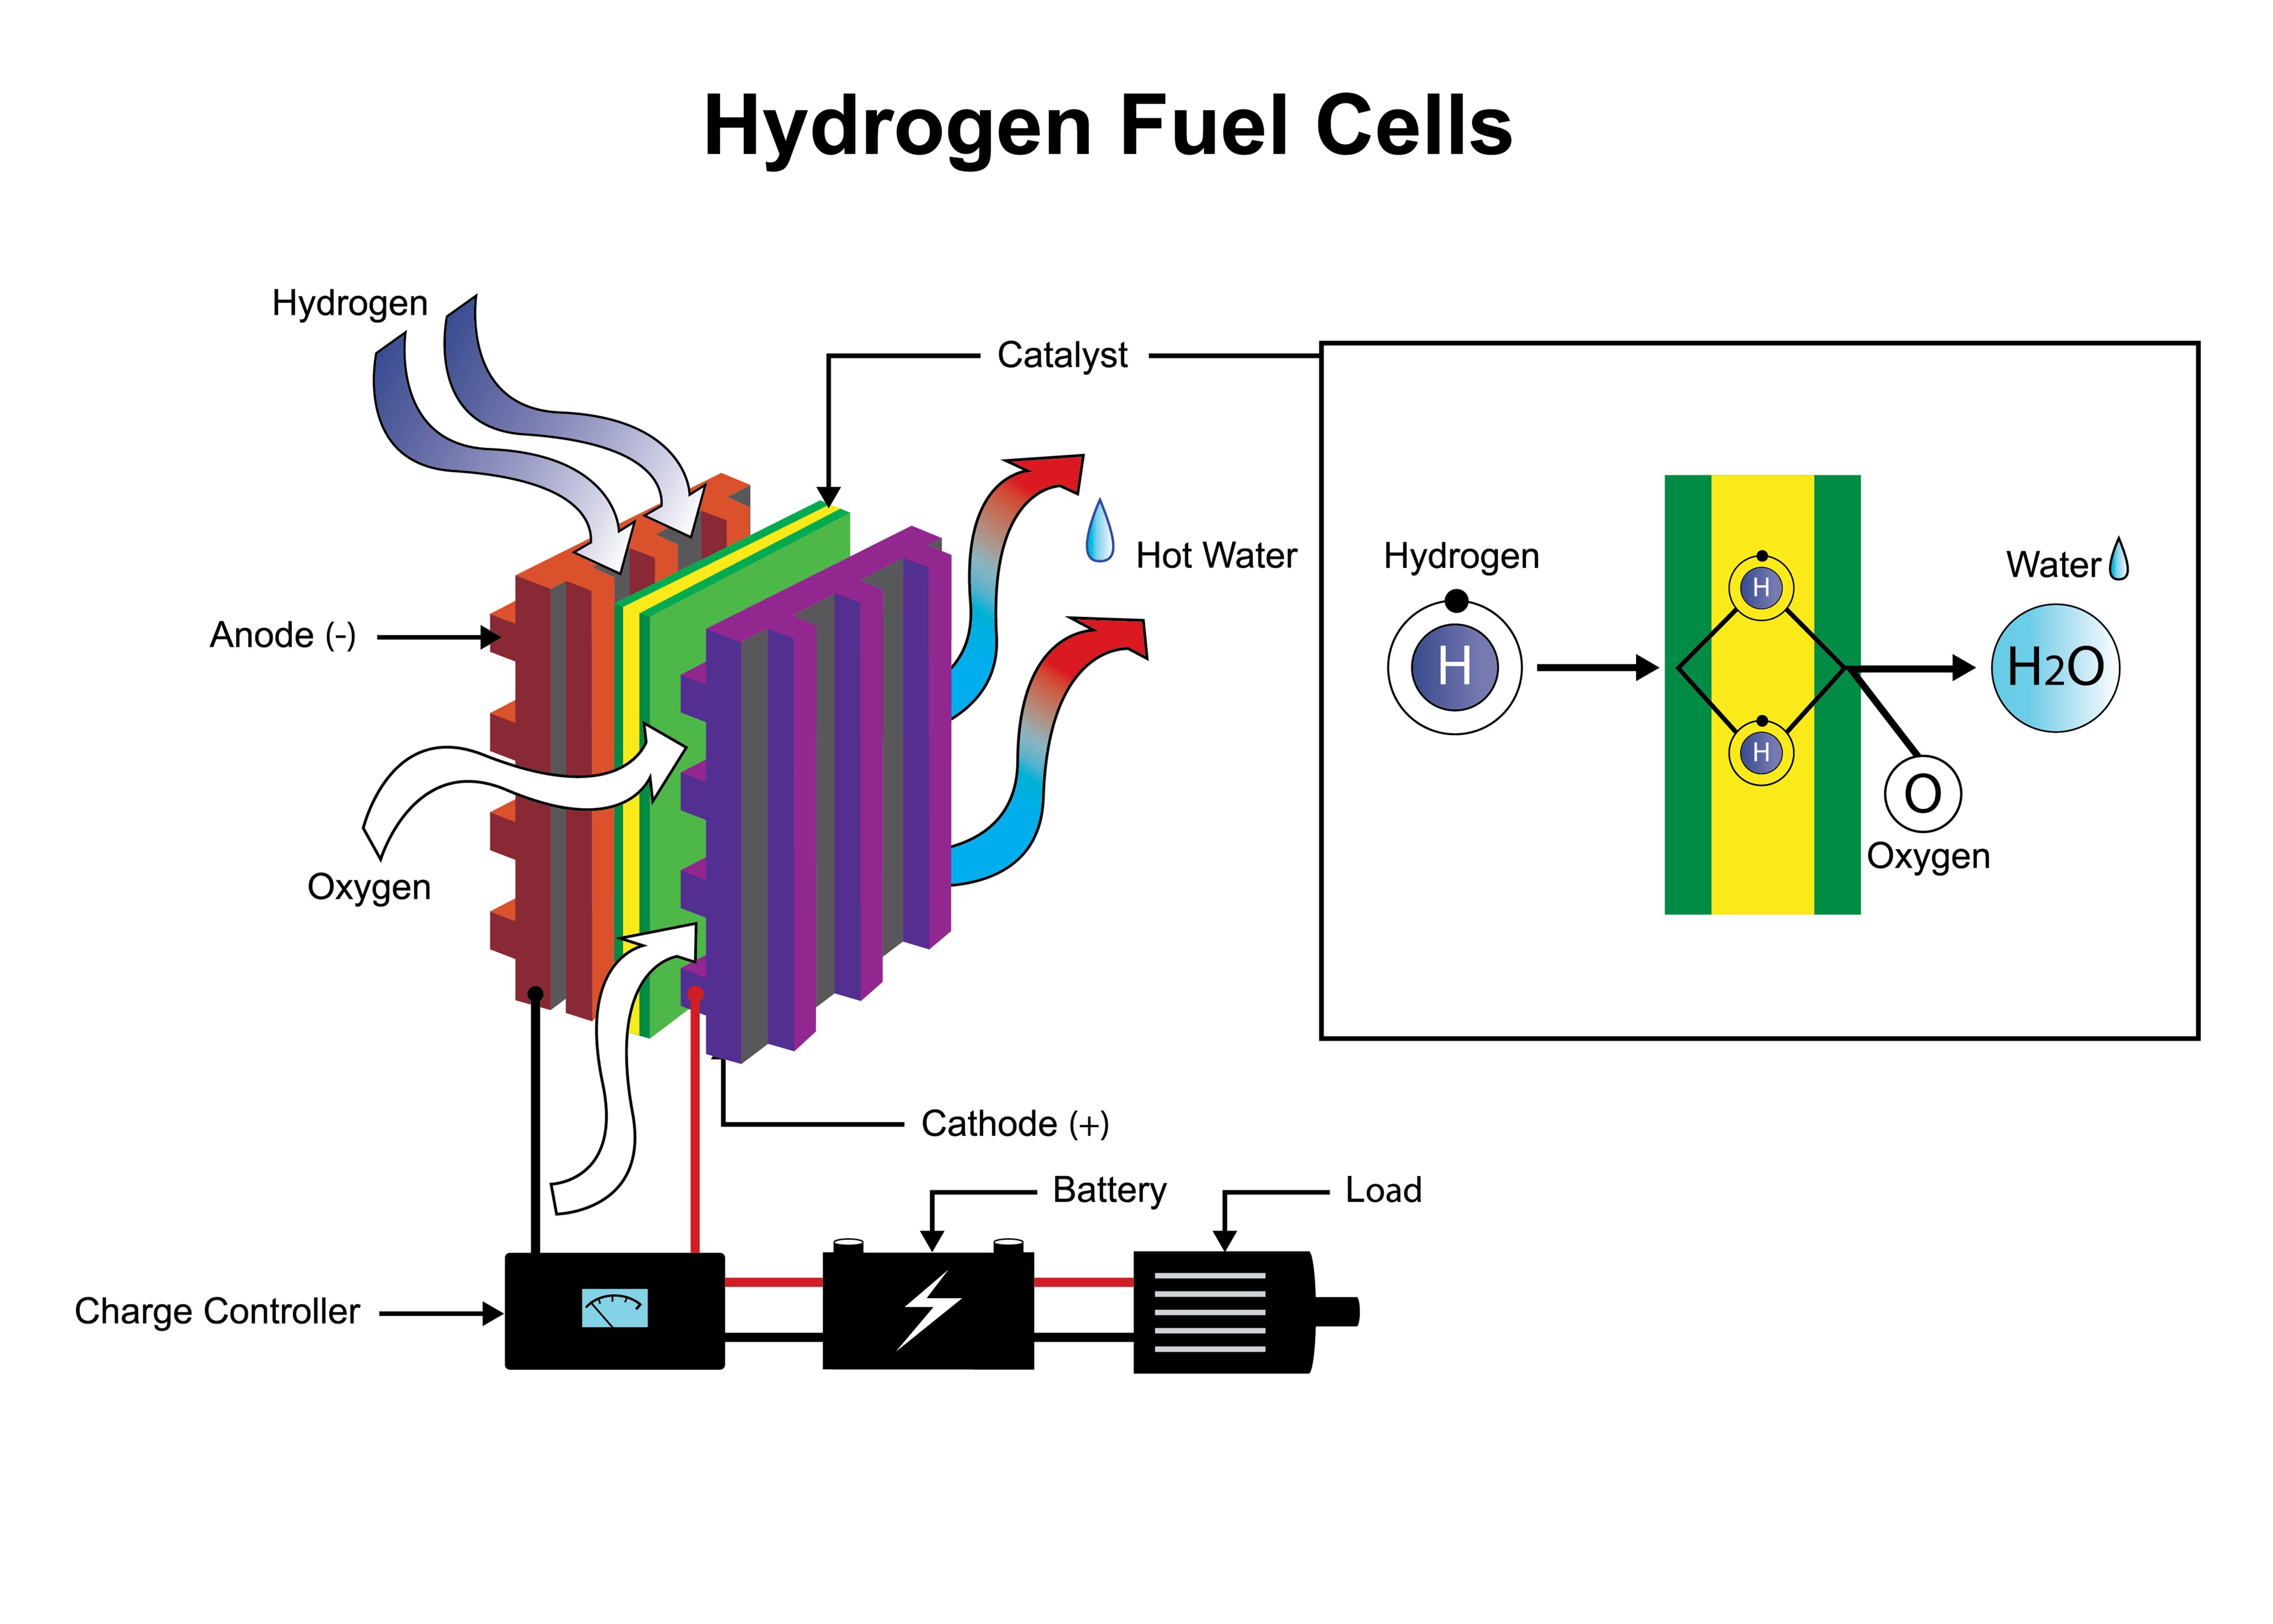 Hydrogen Fuel Cell_battery_charge control_load